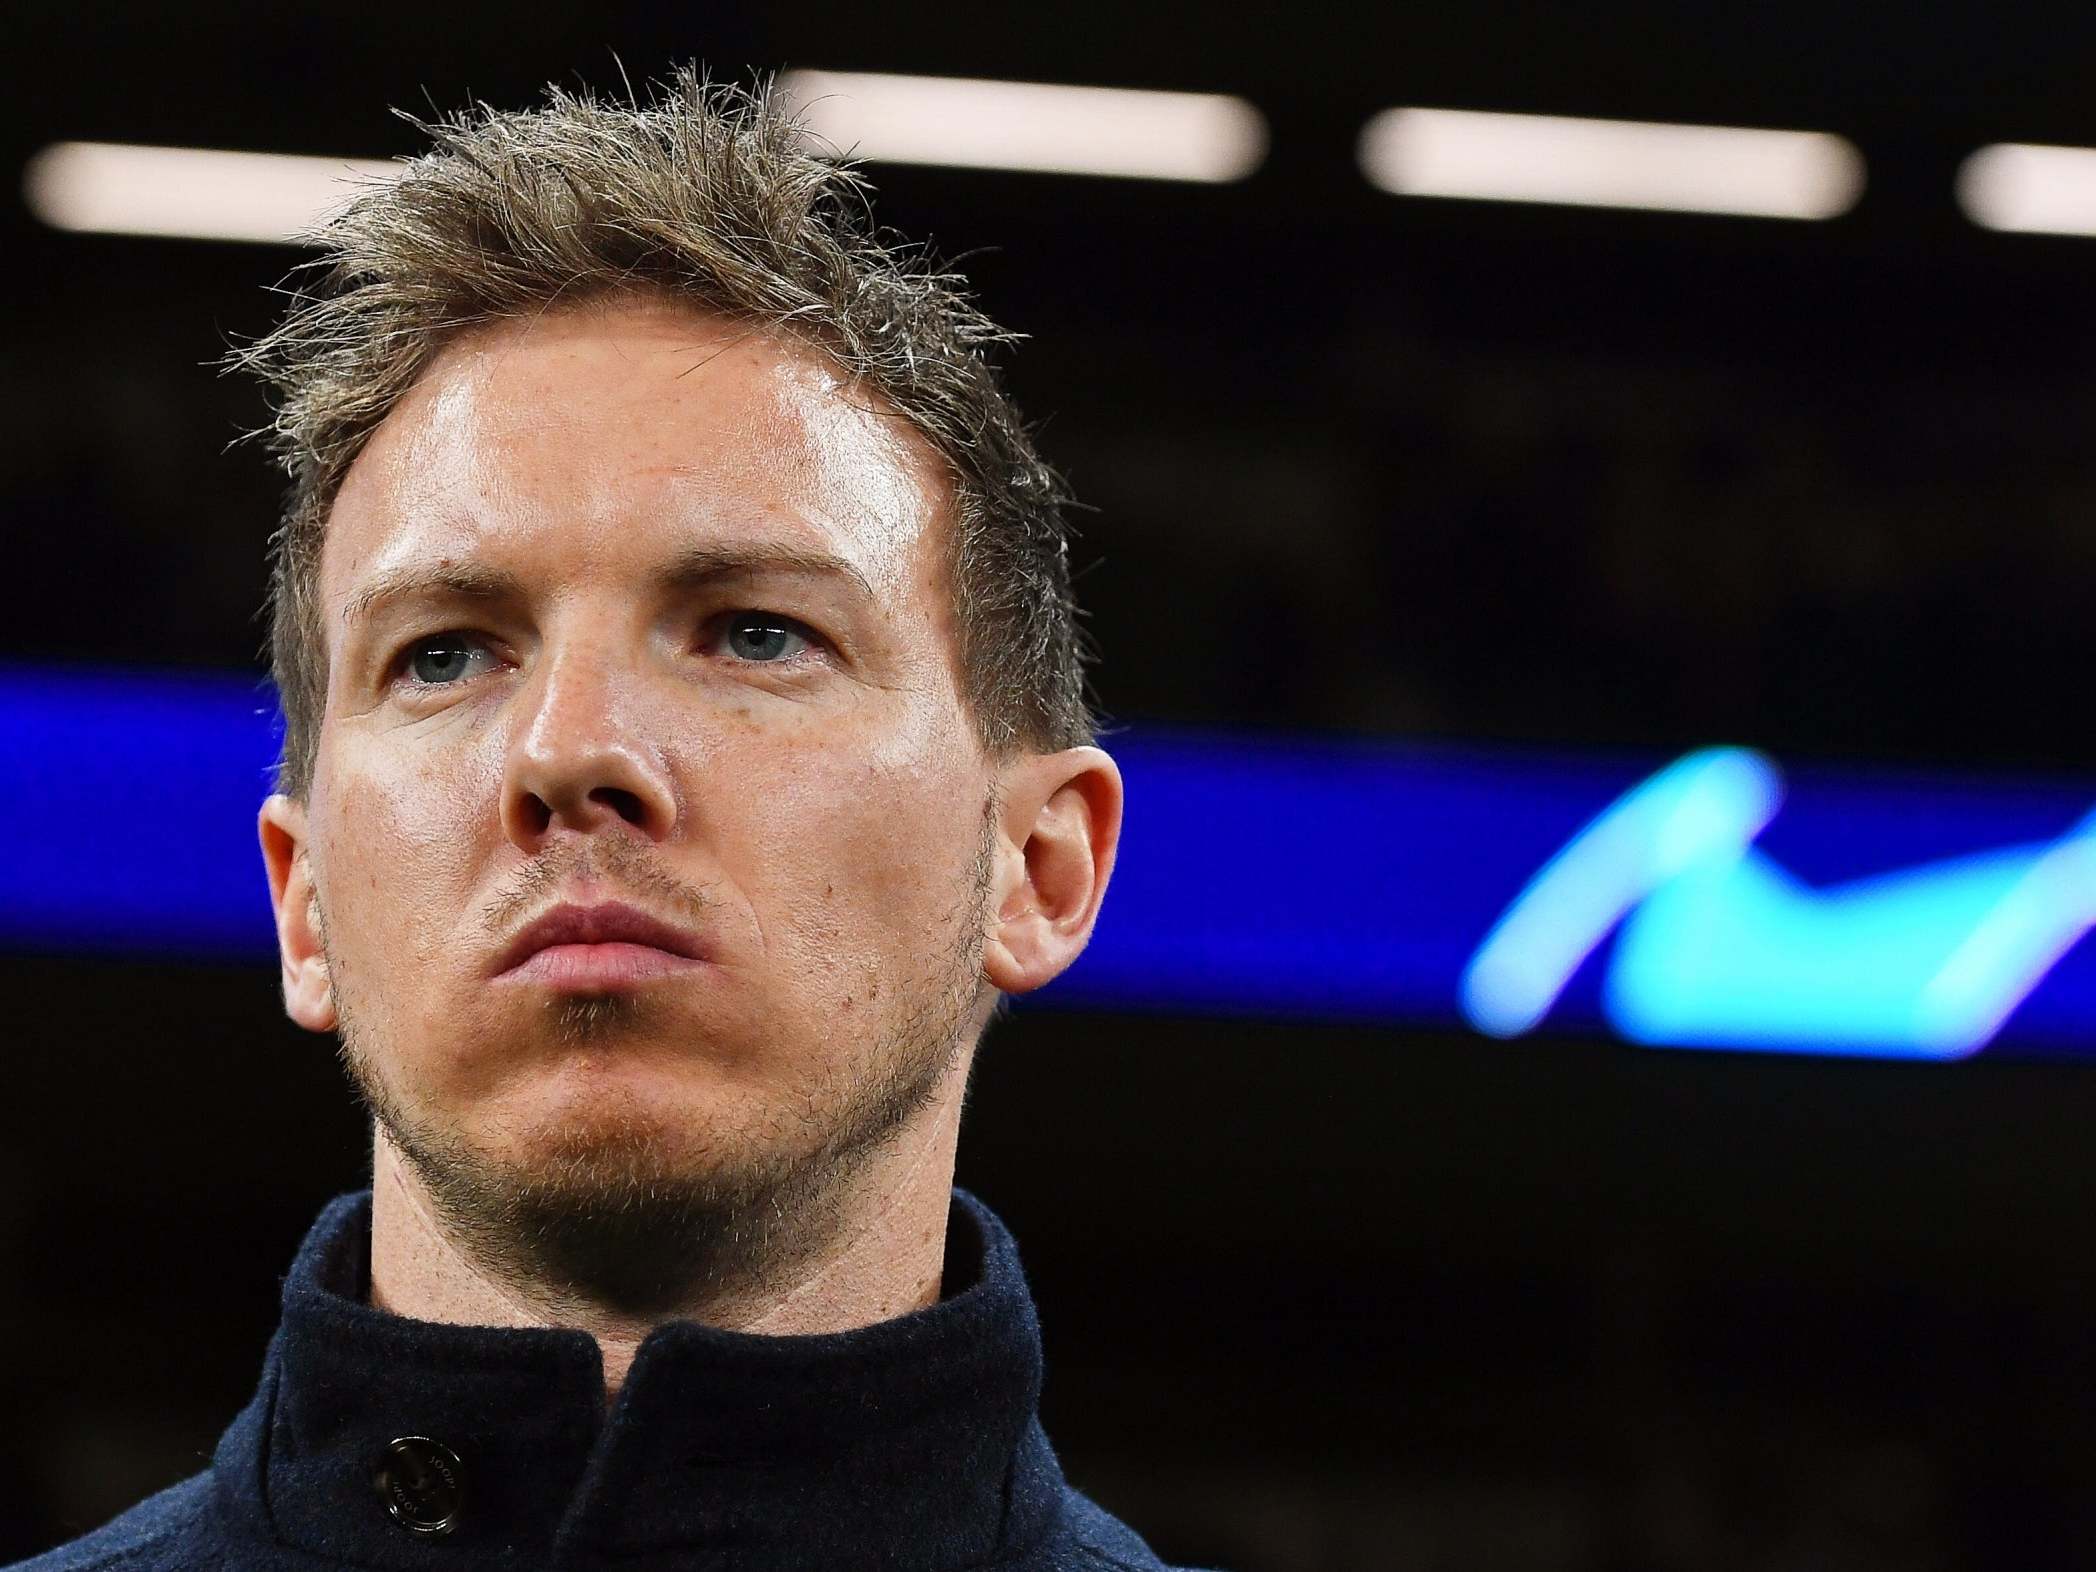 Nagelsmann embraced the challenge of a first knockout match for Leipzig